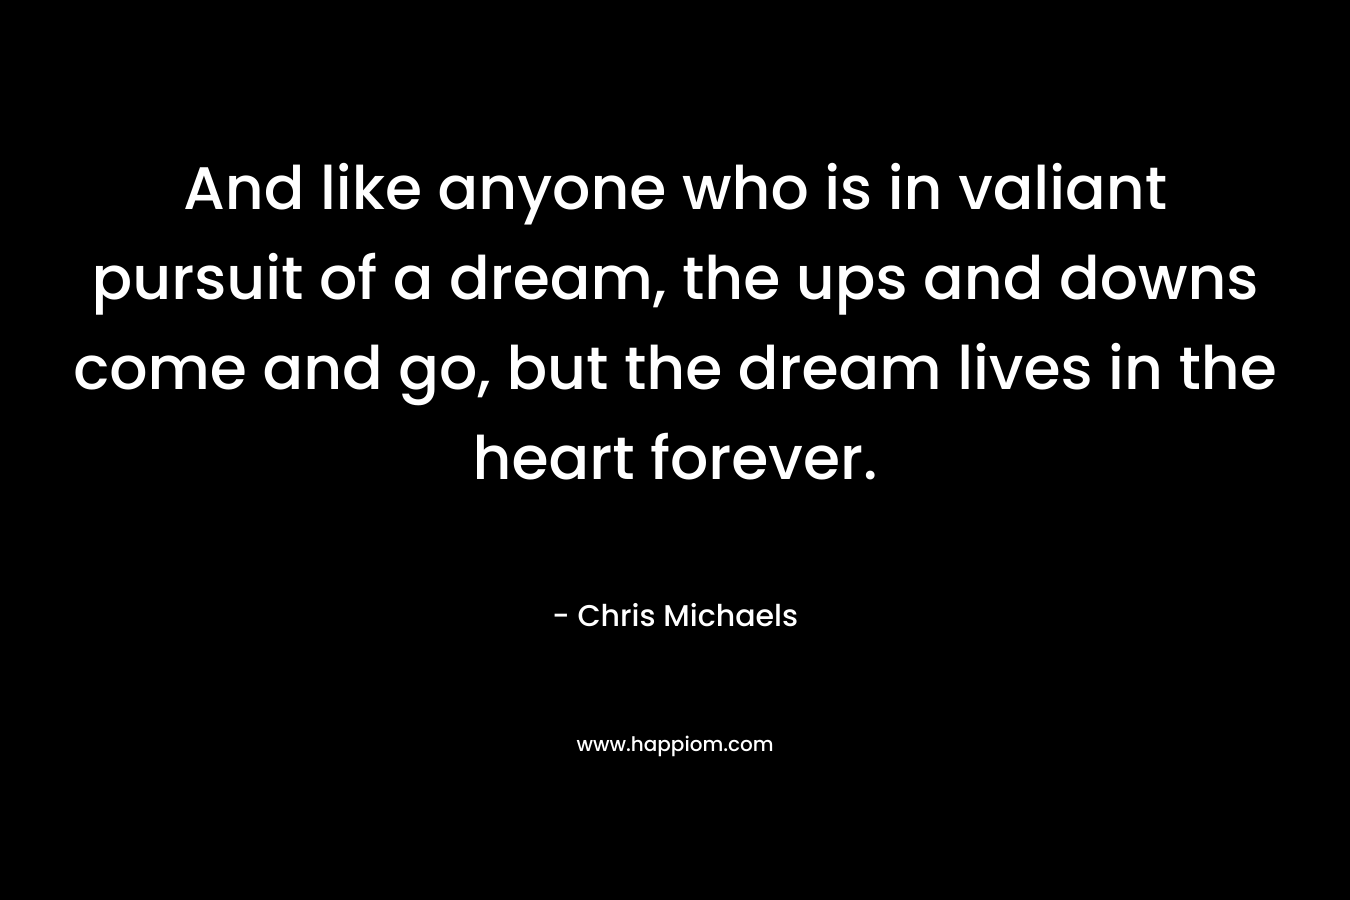 And like anyone who is in valiant pursuit of a dream, the ups and downs come and go, but the dream lives in the heart forever. – Chris Michaels